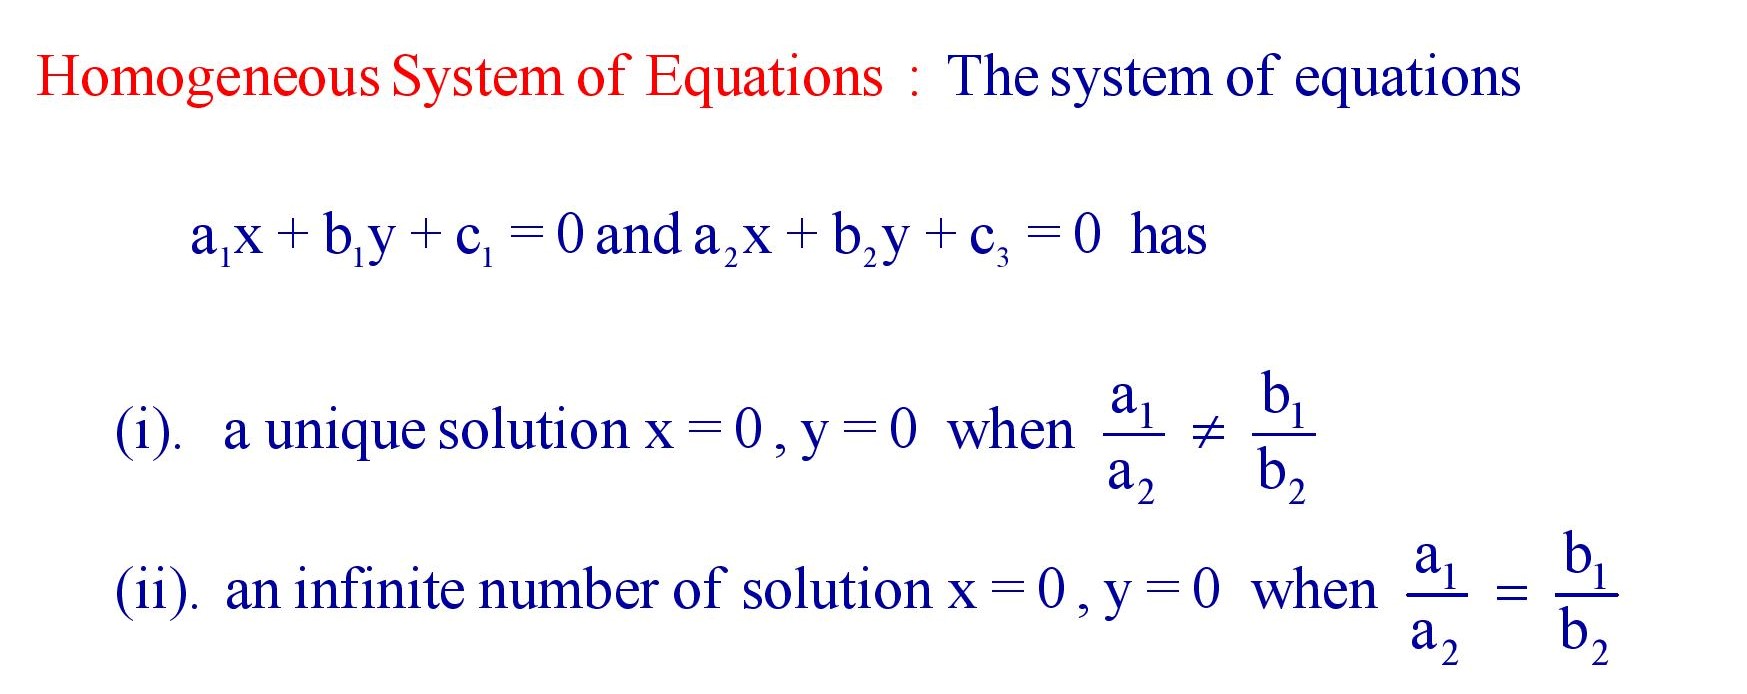 Homogeneous System of Equations